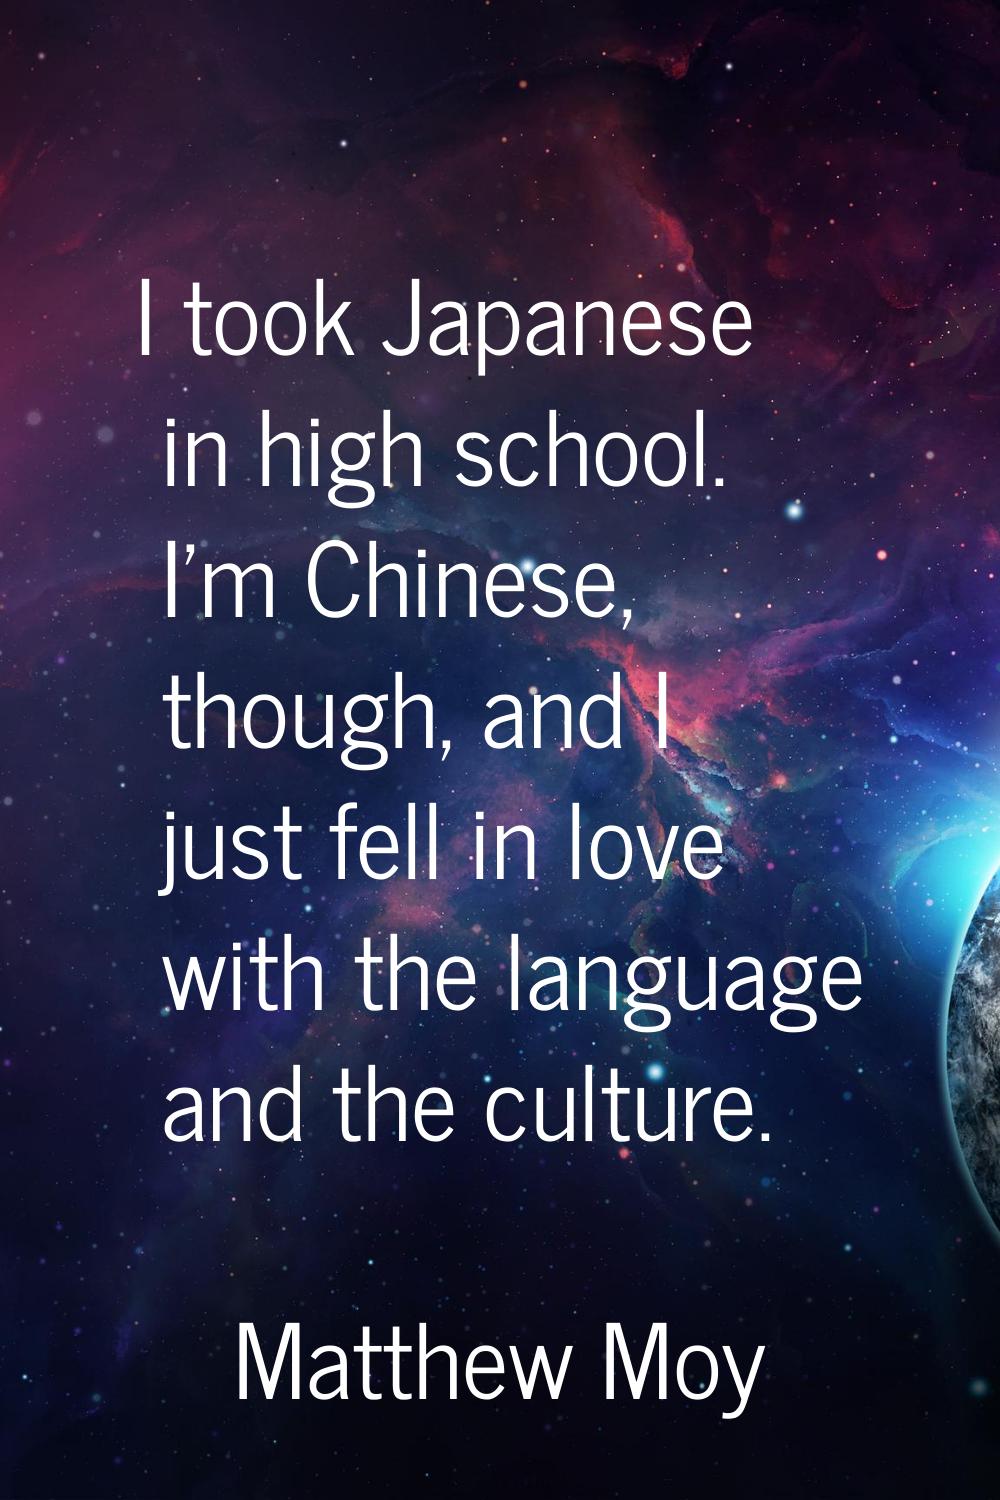 I took Japanese in high school. I'm Chinese, though, and I just fell in love with the language and 